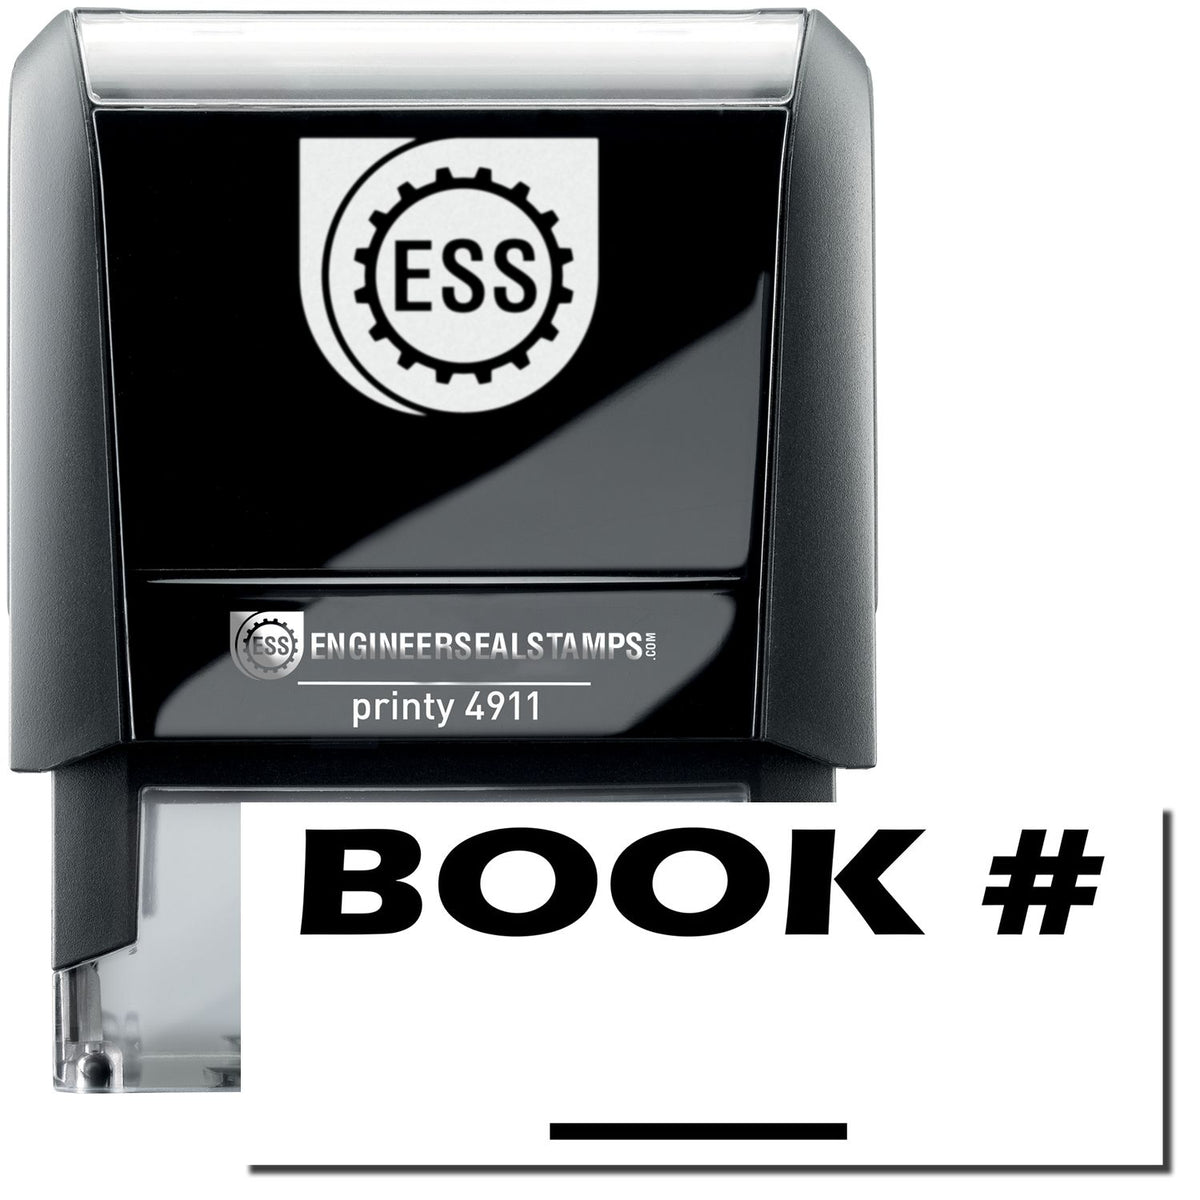 A self-inking stamp with a stamped image showing how the text &quot;BOOK #&quot; with a line under it is displayed after stamping.